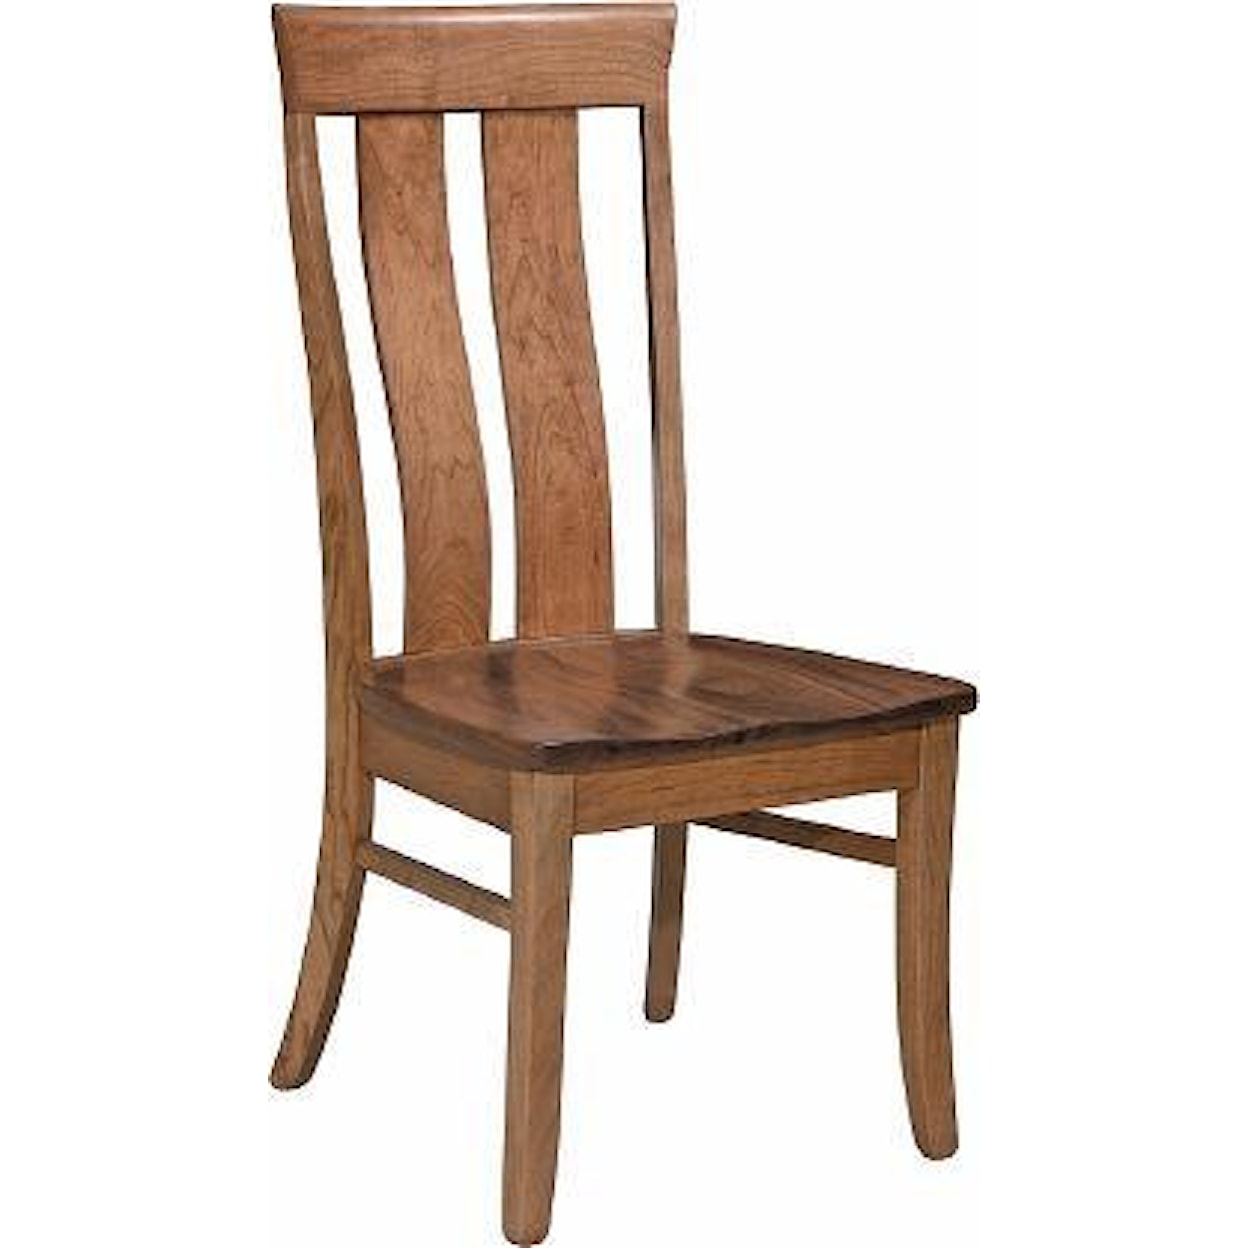 Wengerd Wood Products Aurora Side Chair